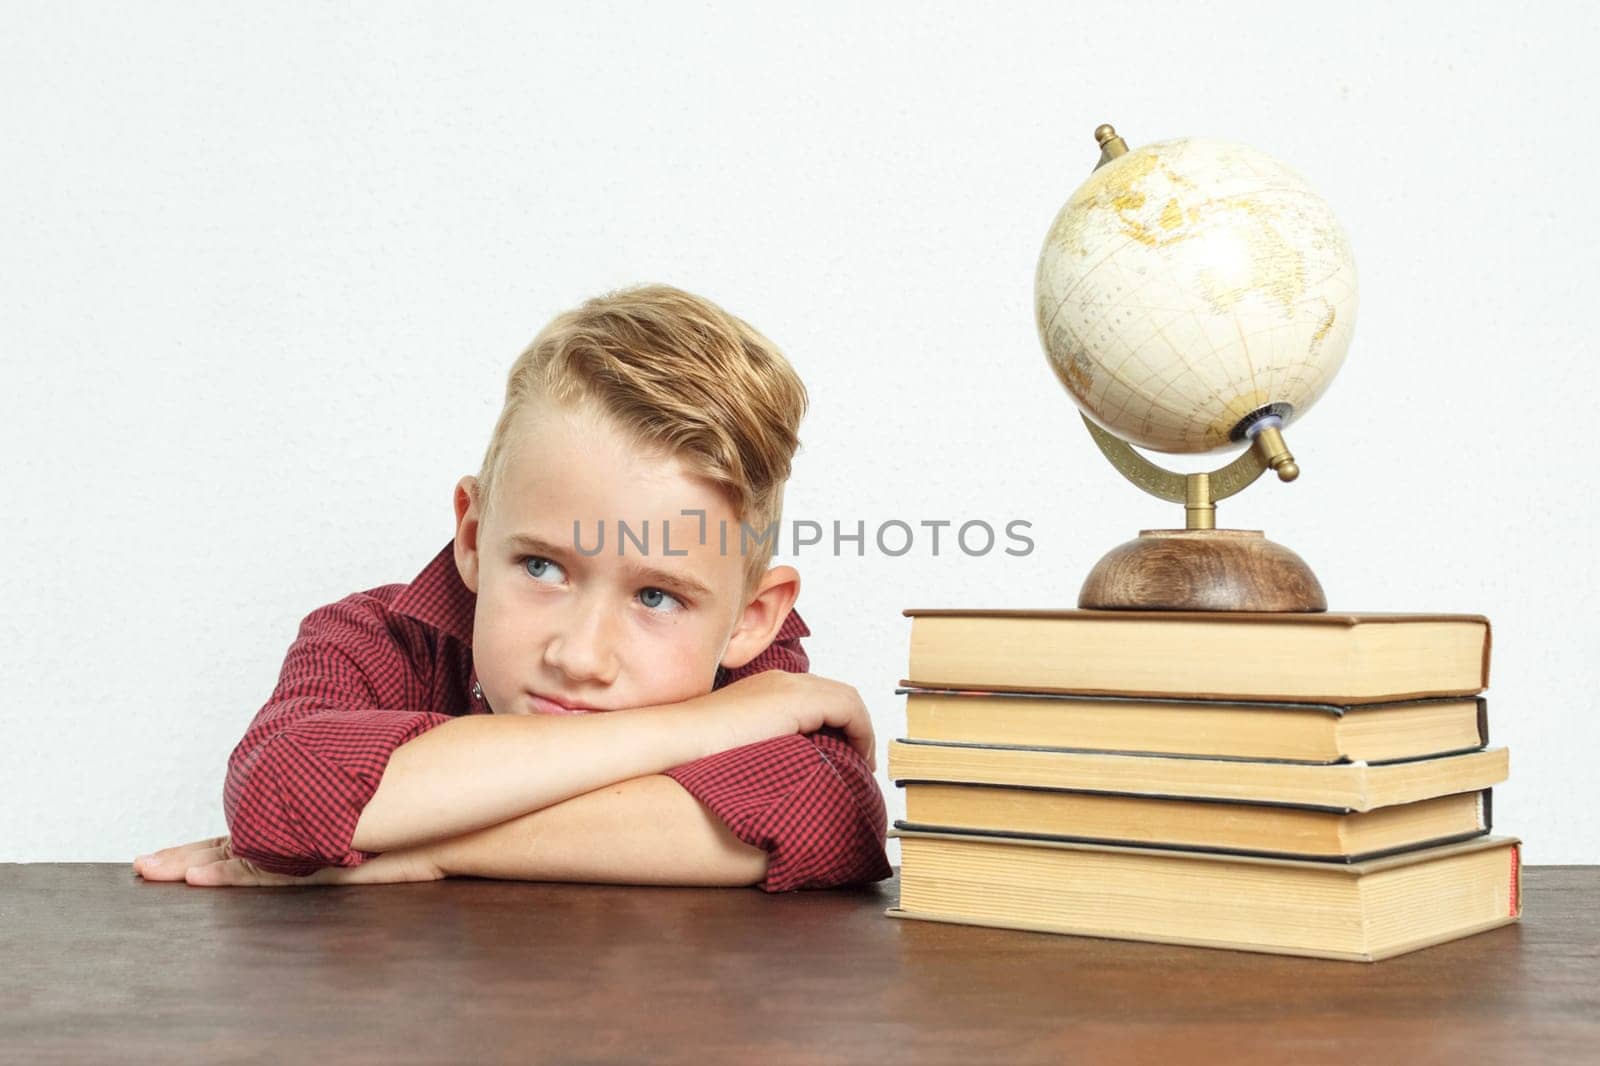 A tired schoolboy sits at the table, put his head on his hands. On the table there are books, a globe and an alarm clock. by Sd28DimoN_1976